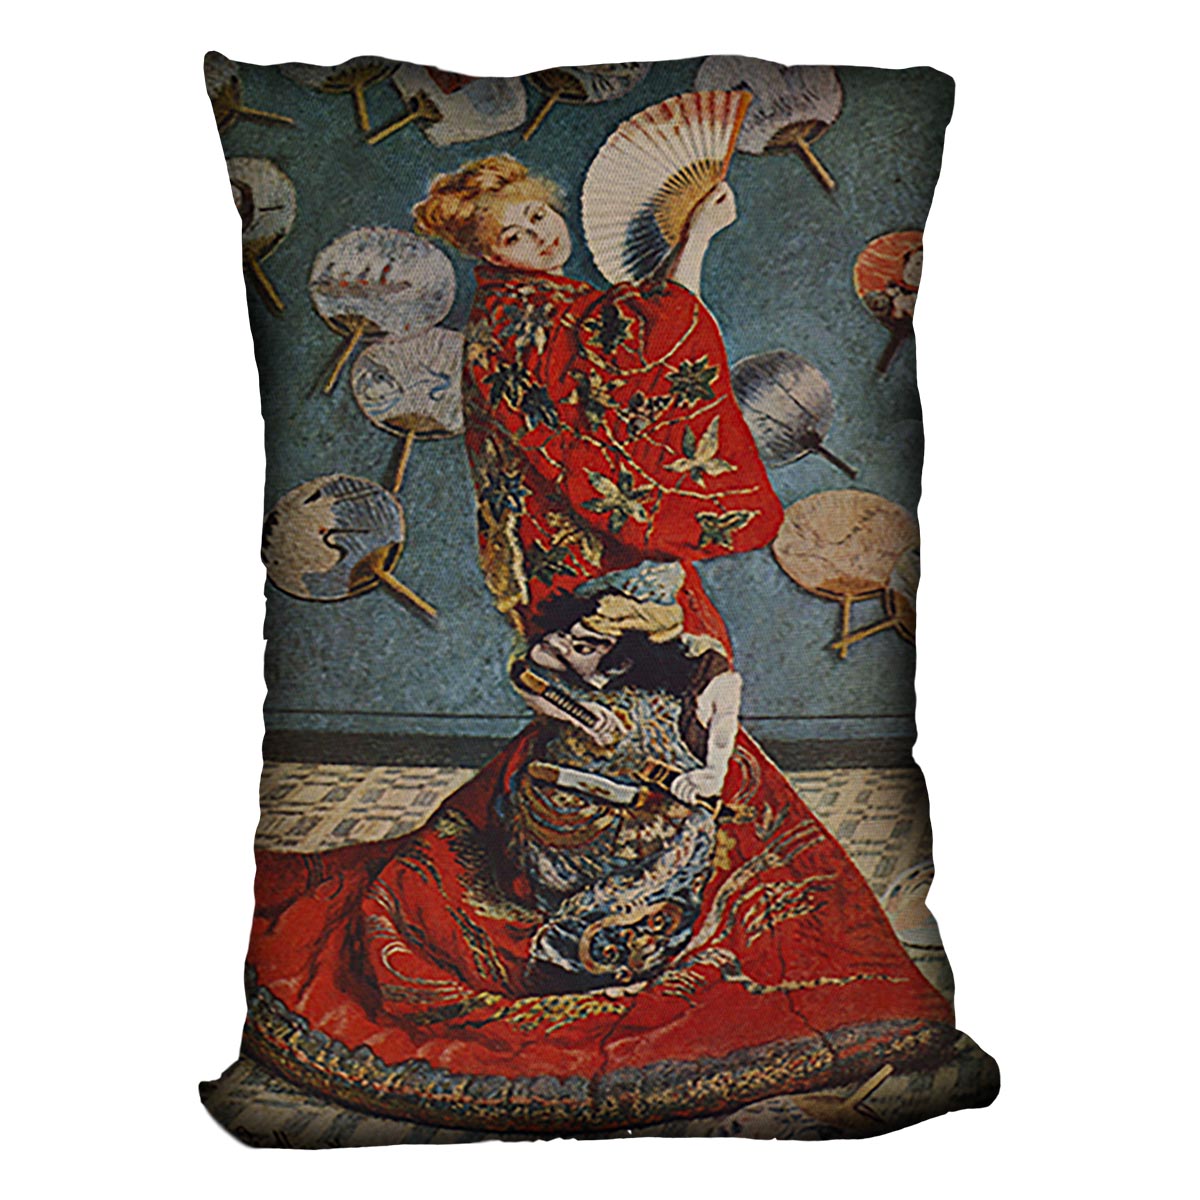 Camille in Japanese dress by Monet Cushion